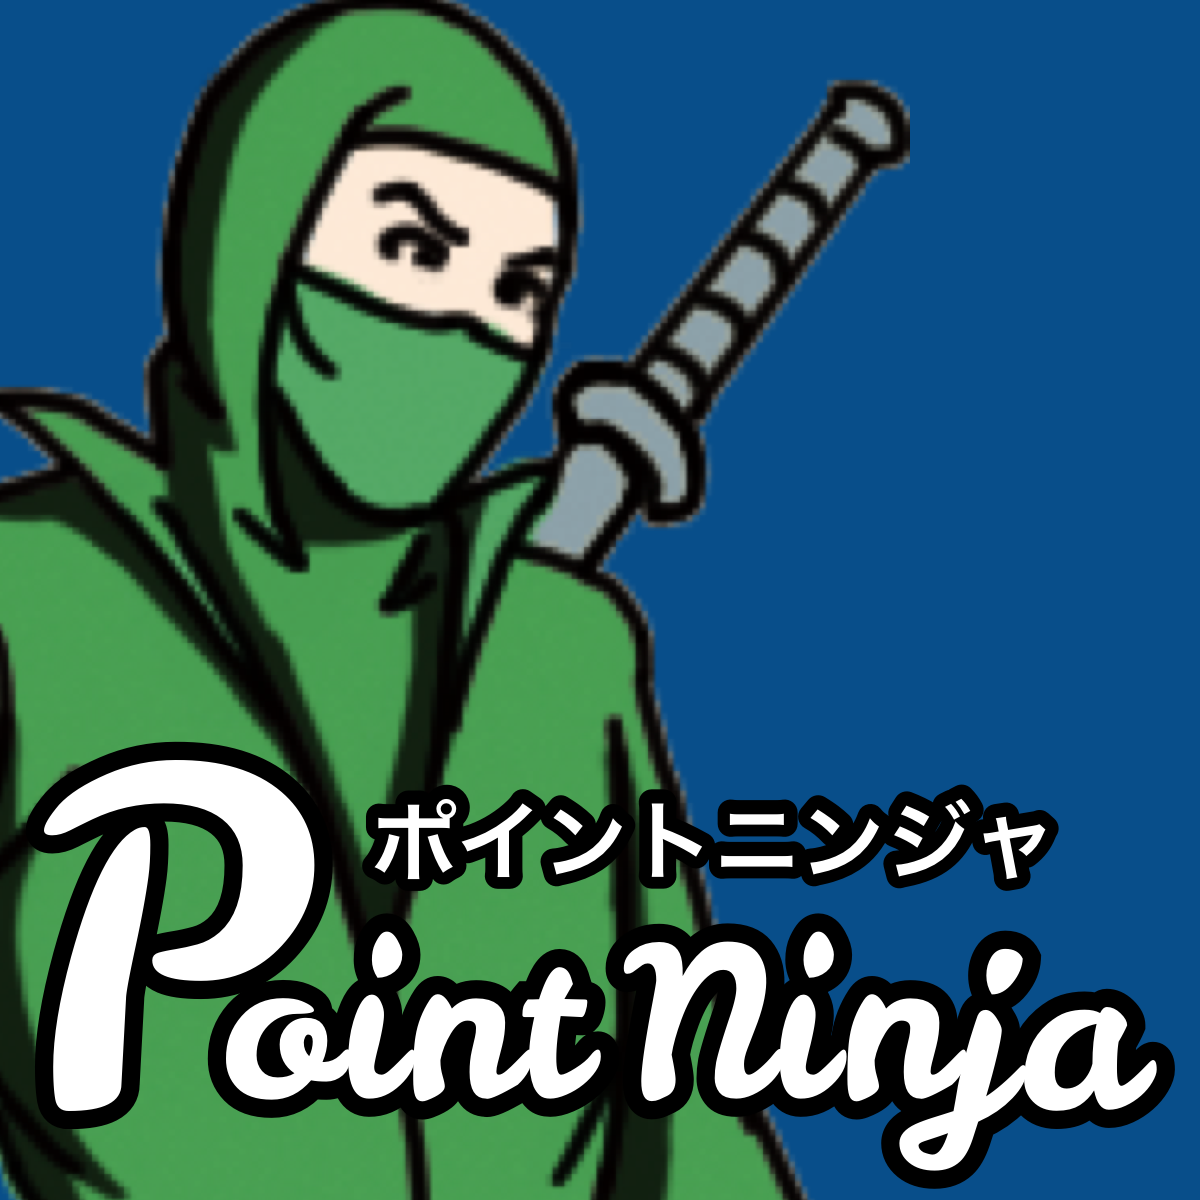 Hire Shopify Experts to integrate ãƒã‚¤ãƒ³ãƒˆãƒ‹ãƒ³ã‚¸ãƒ£â€‘Point Ninjaâ€‘ app into a Shopify store